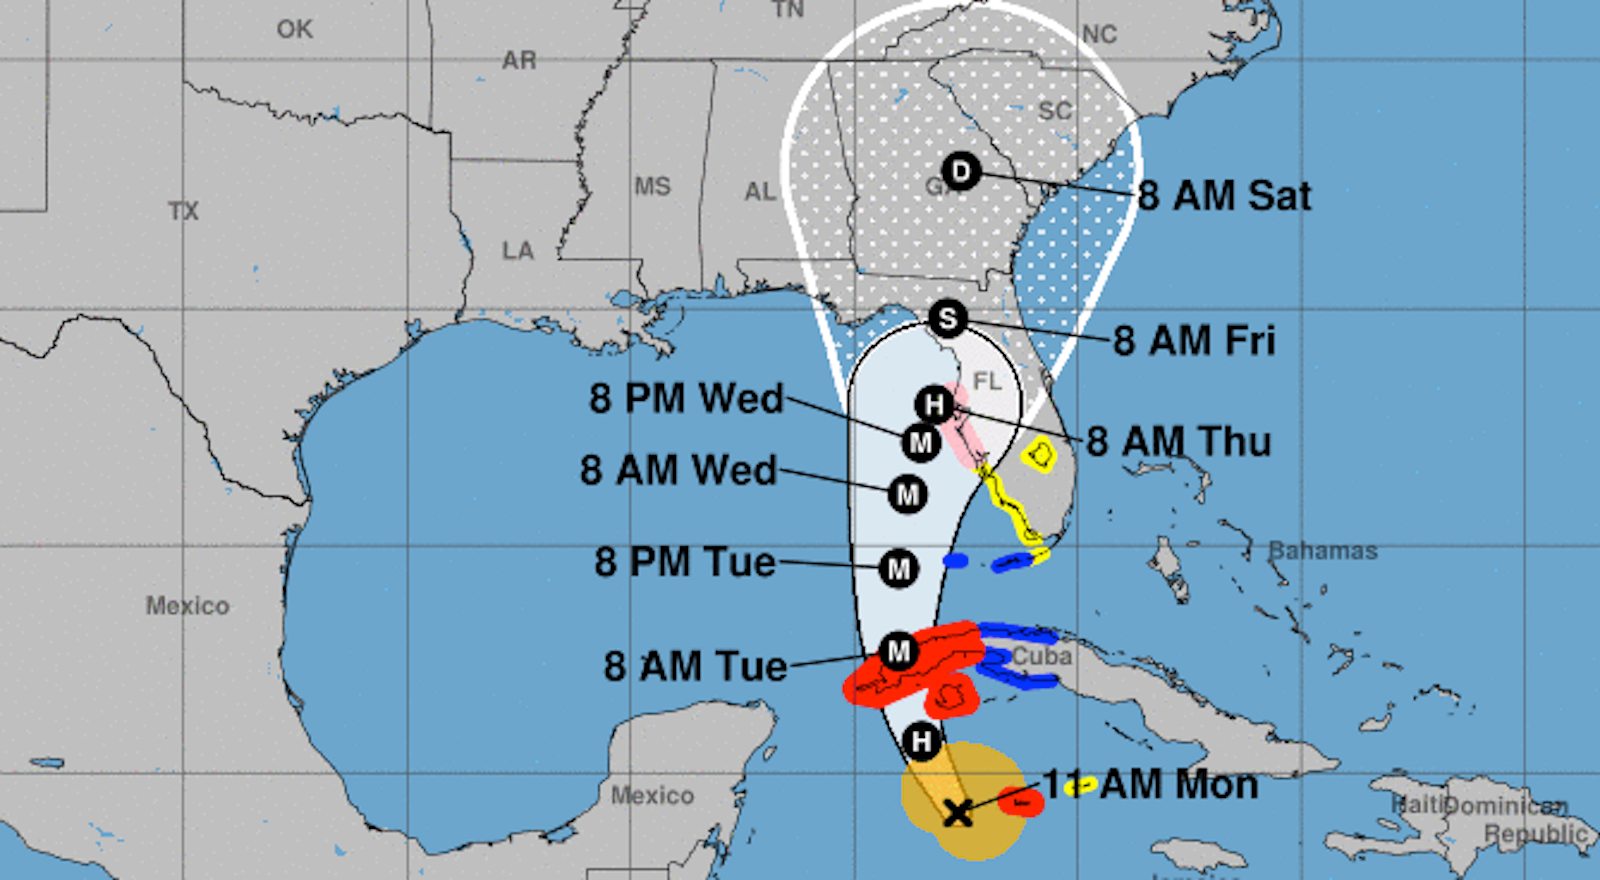 Hurricane Ian likely to affect travel for days as preparations intensify